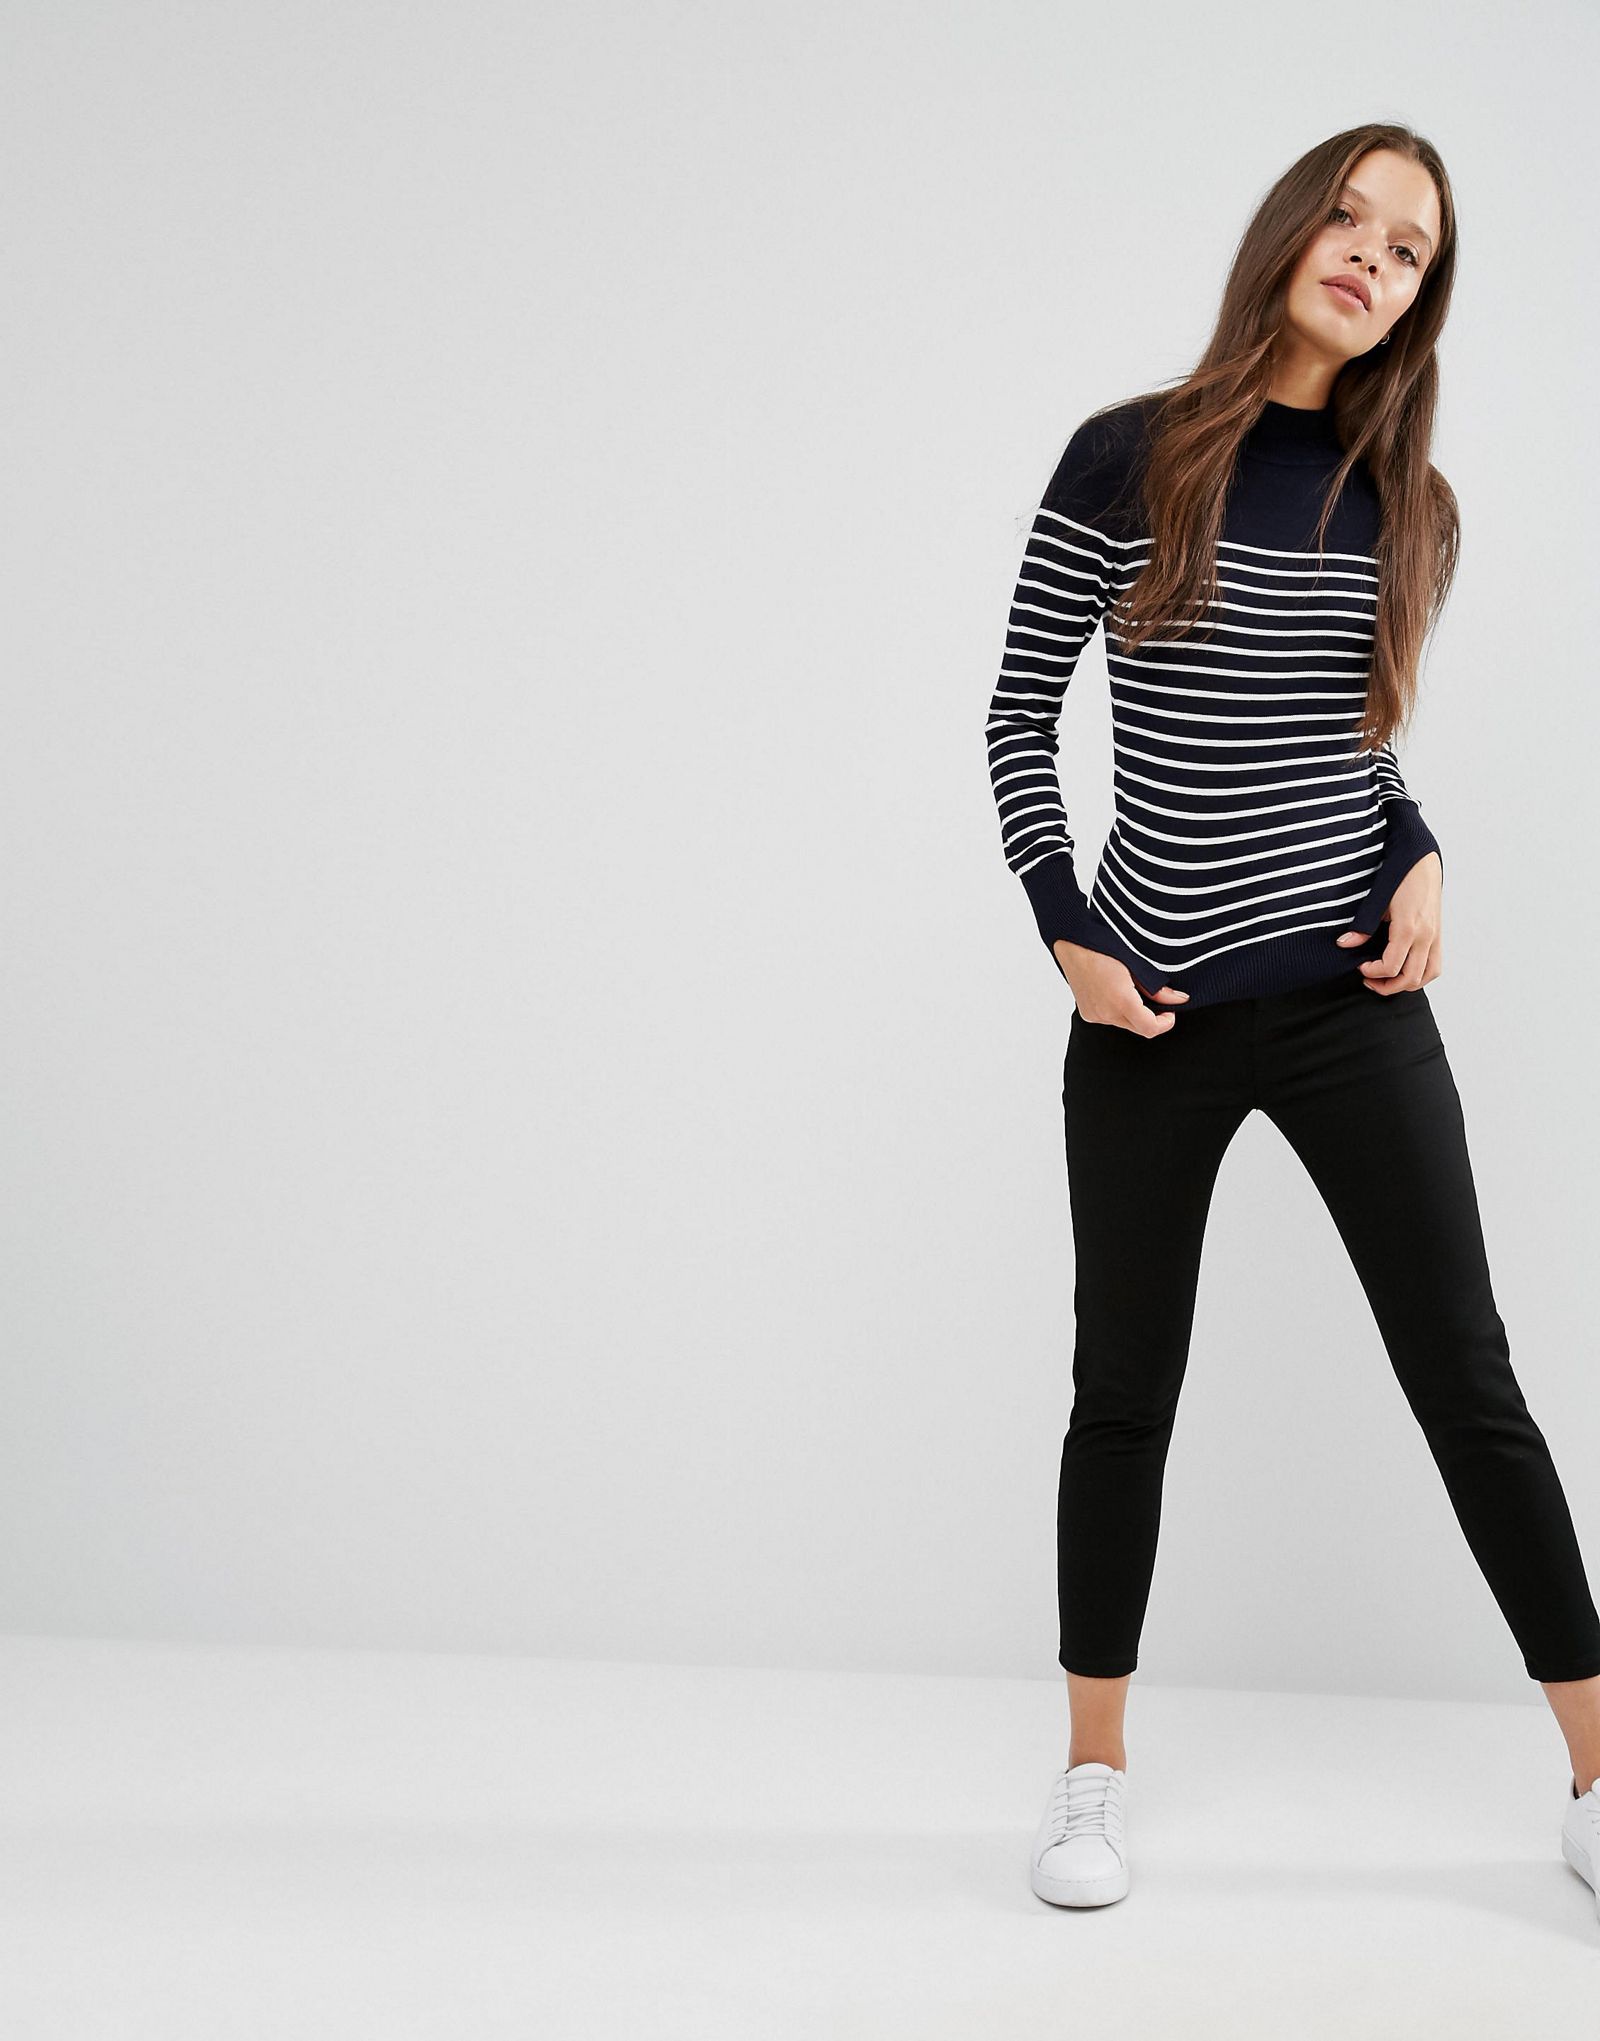 ASOS PETITE Jumper In Stripe With High Neck